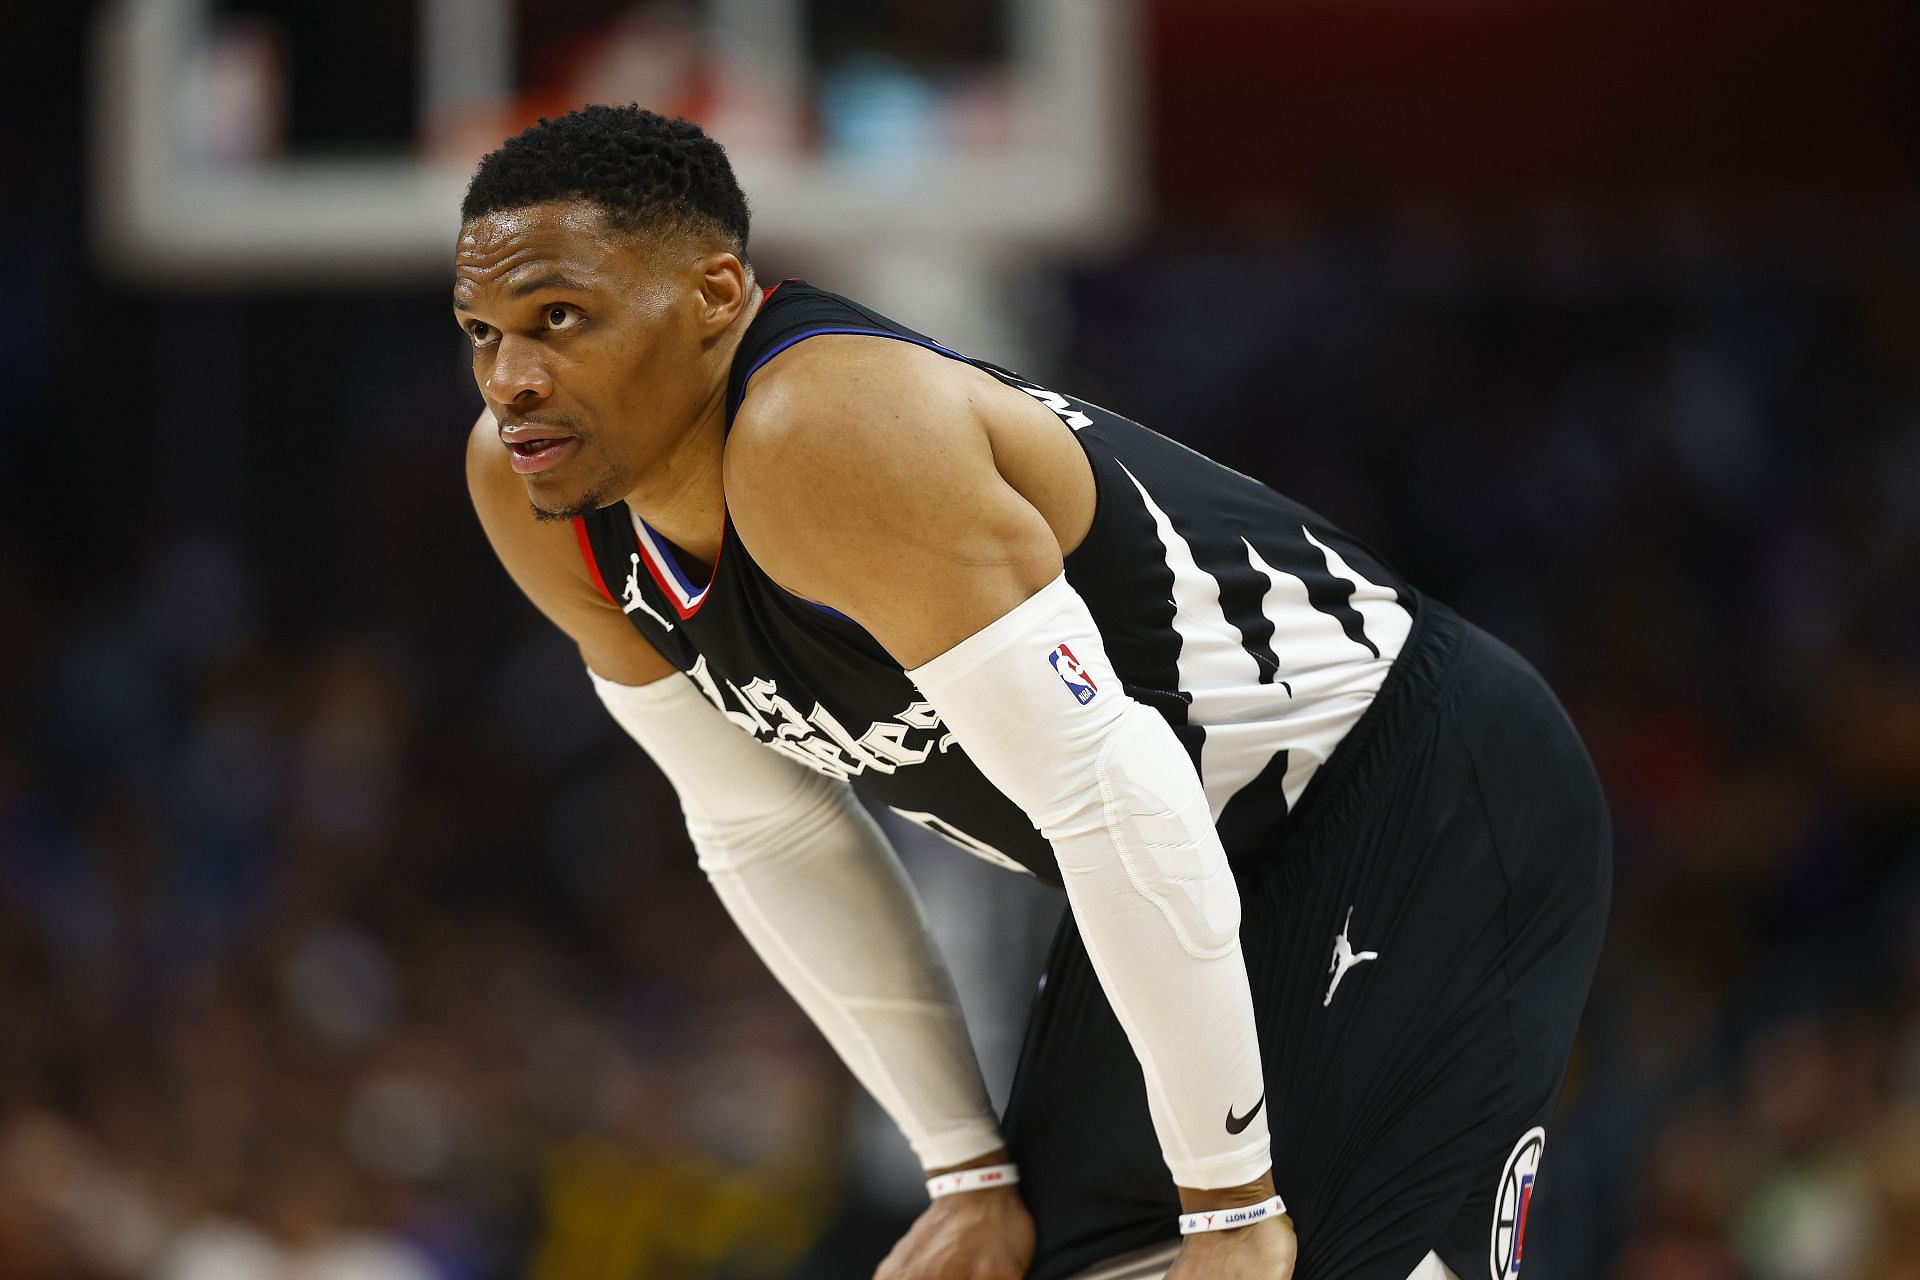 When will Russell Westbrook return from his injury?